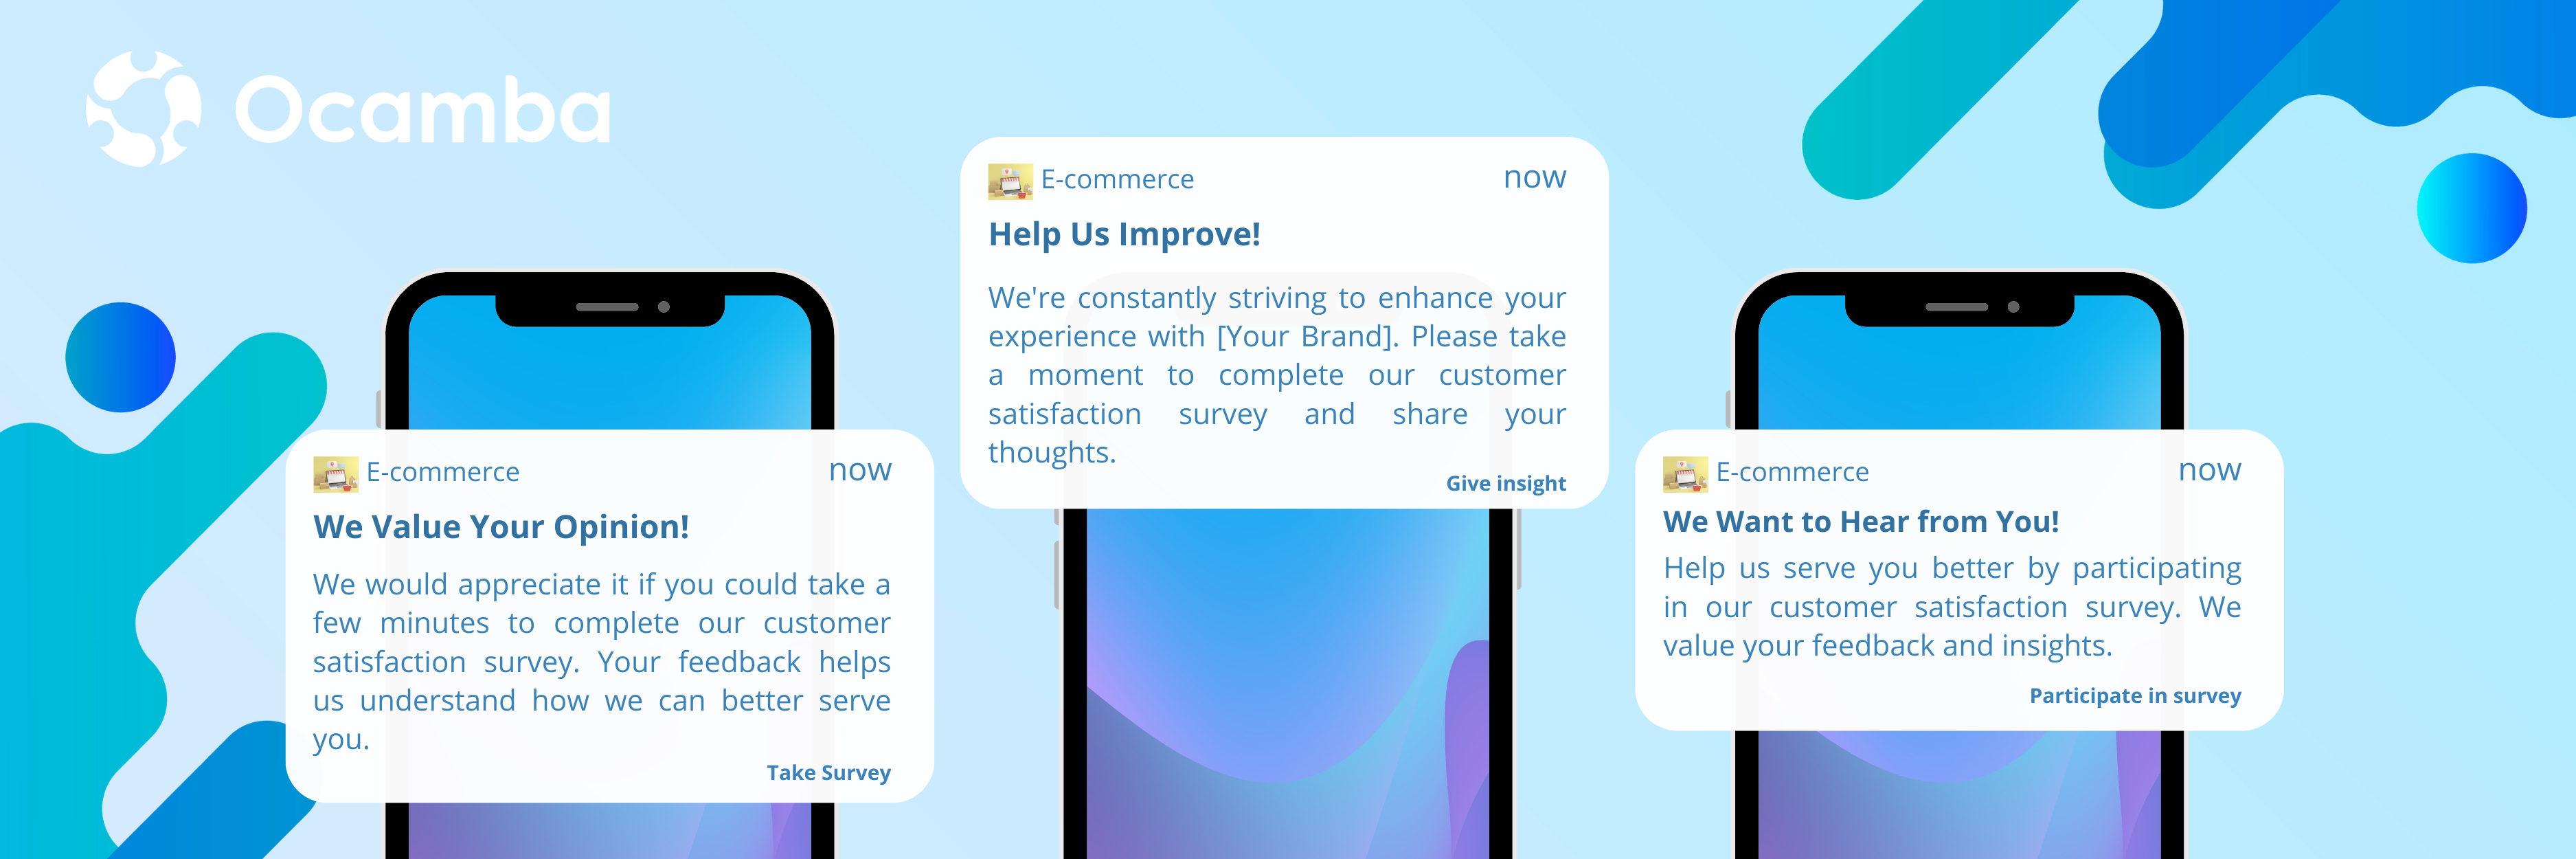 Ecommerce push notifications templates for surveying customers